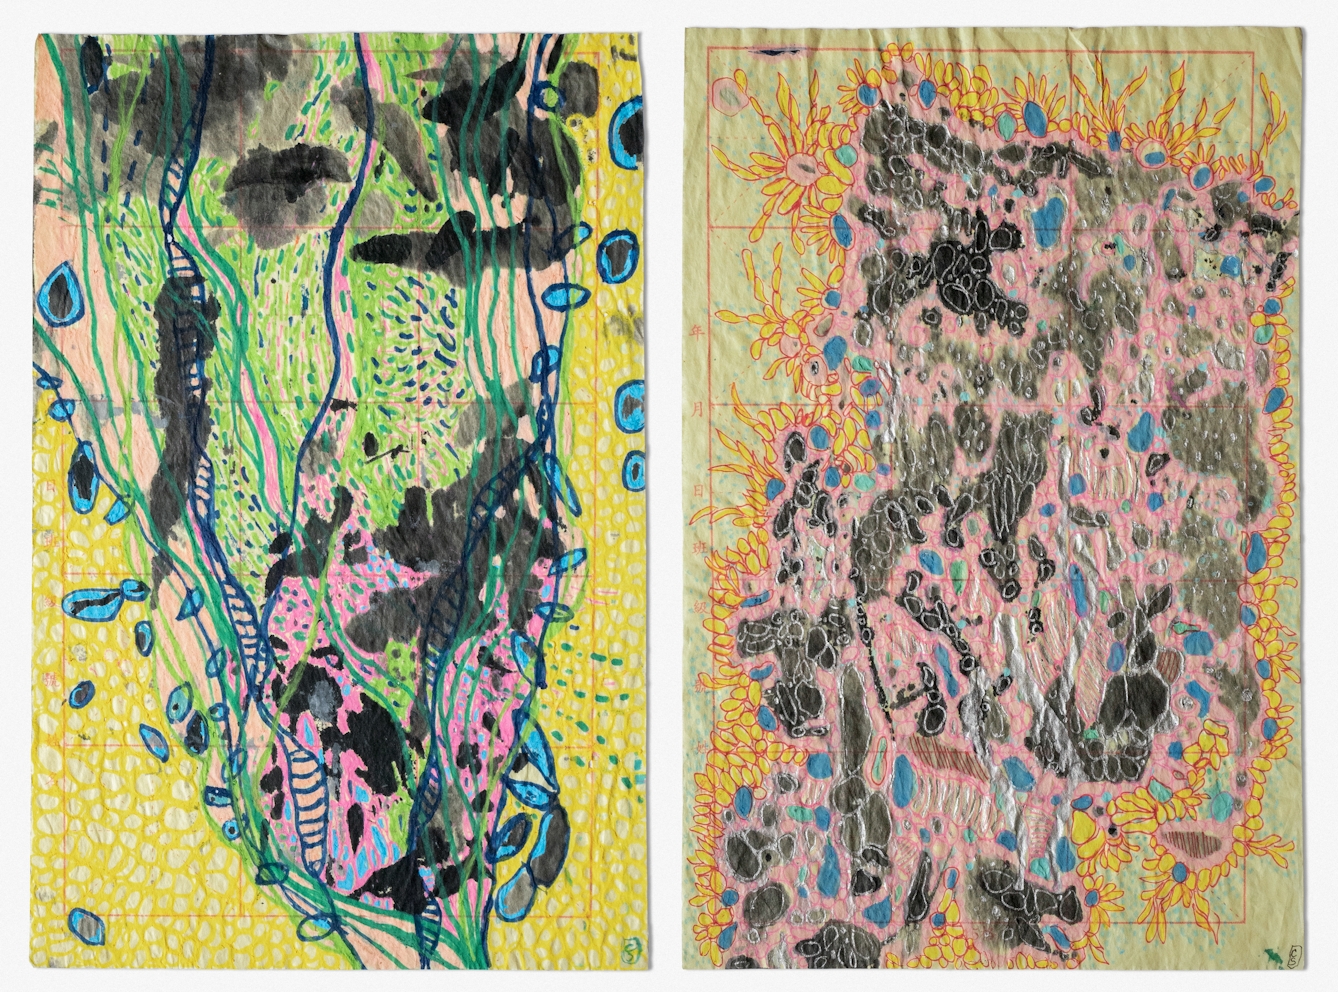 Photographic diptych of two abstract drawings on pink gridded Chinese calligraphy paper that is slightly crumpled and folded. On the left is an abstract mass of tiny green, pink and dark blue brushstrokes. These strokes are broken up by a number of green and blue lines which extend out from the bottom right of the page. There are some dark splodges ranging from grey to black, whilst surrounding the green and blue lines and forming the background is a collection of densely packed, hollow yellow circles. On the right we can see an abstract, cell like shape comprised of pink ink punctuated with both blue and black splodges with a faint thin white outline. The border is made up of small, yellow circular shapes with a thin red outline. These yellow shapes are packed closely together, and extend outwards from the central mass, giving it some small branches. 